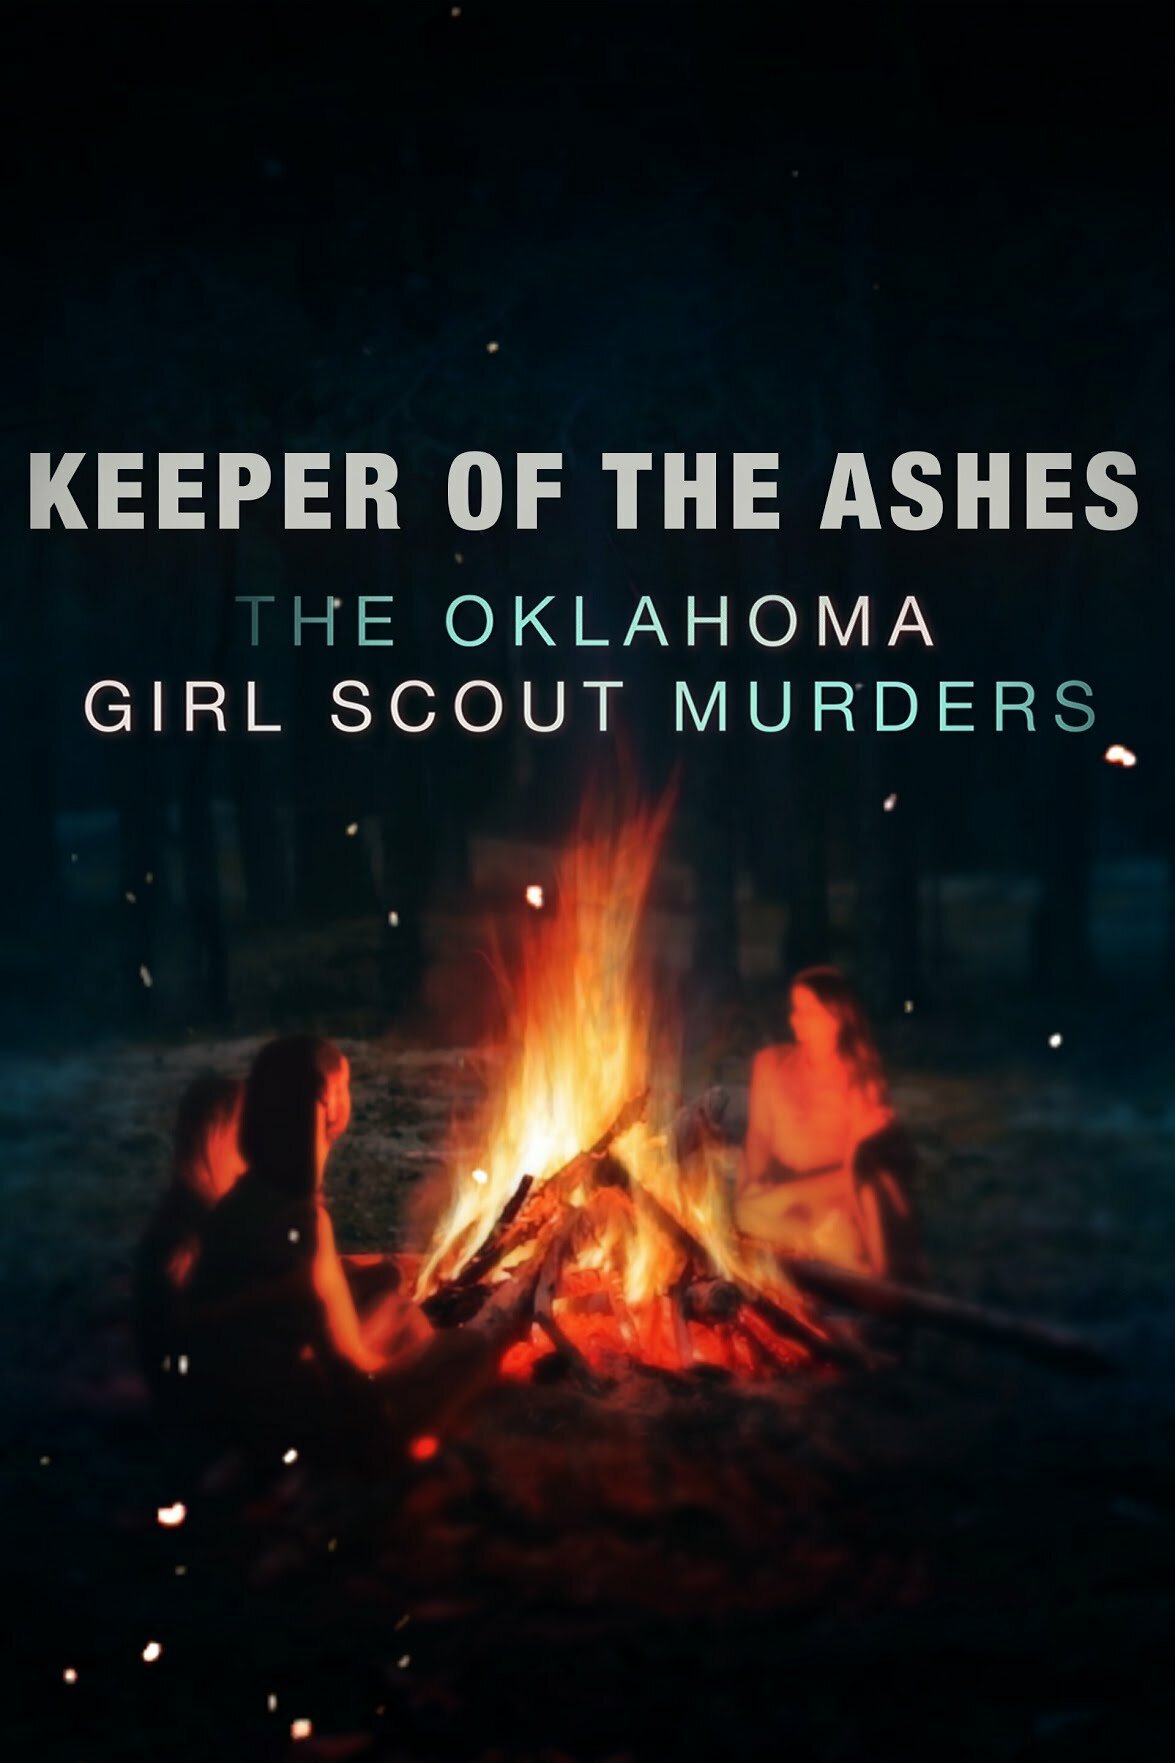 Keeper of the Ashes: The Oklahoma Girl Scout Murders ne zaman